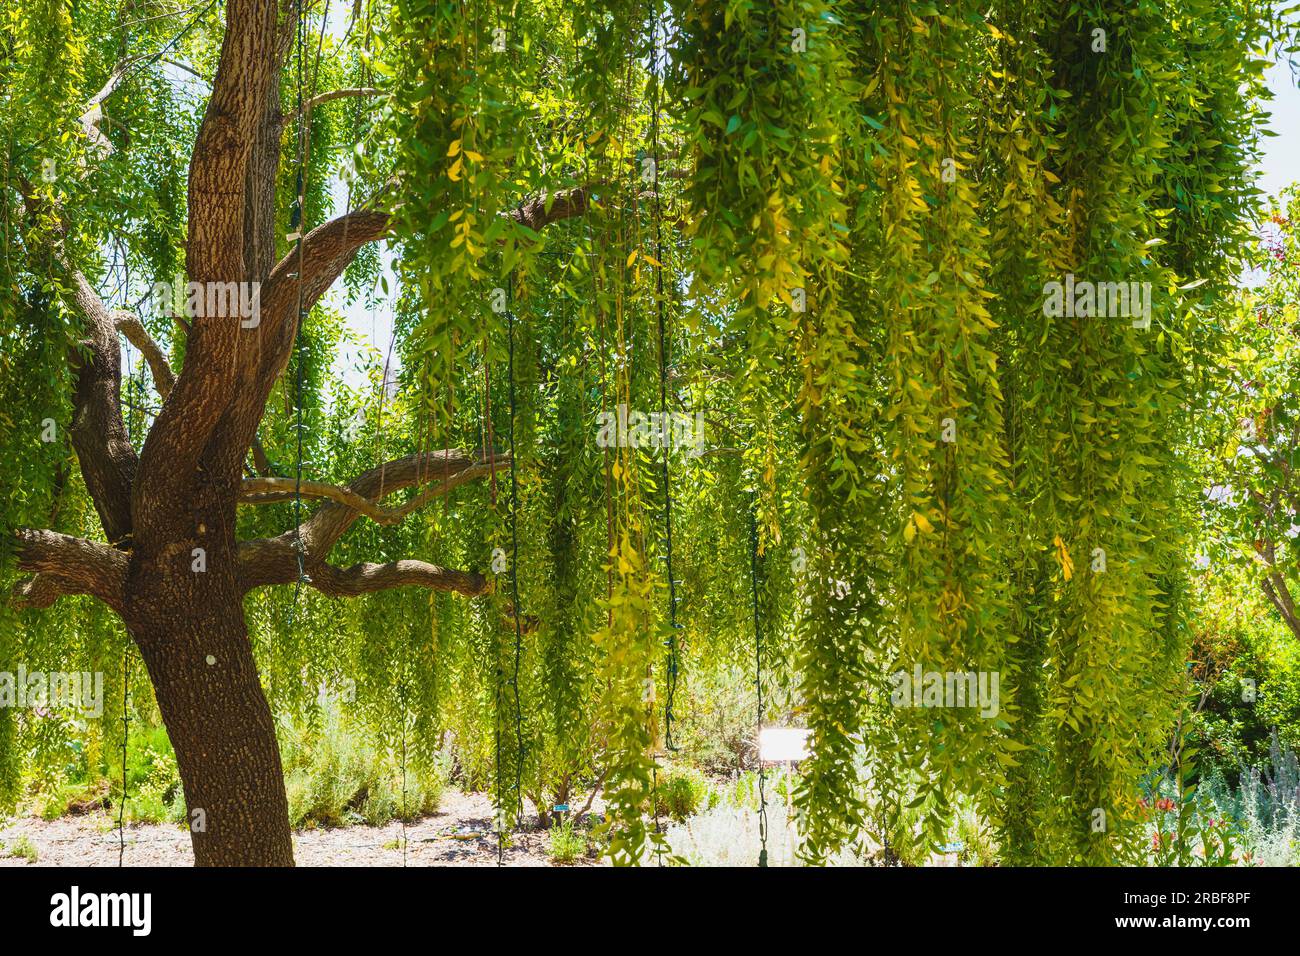 Mayten tree (Maytenus boaria), evergreen weeping tree close-up in the garden on a bright sunny day Stock Photo